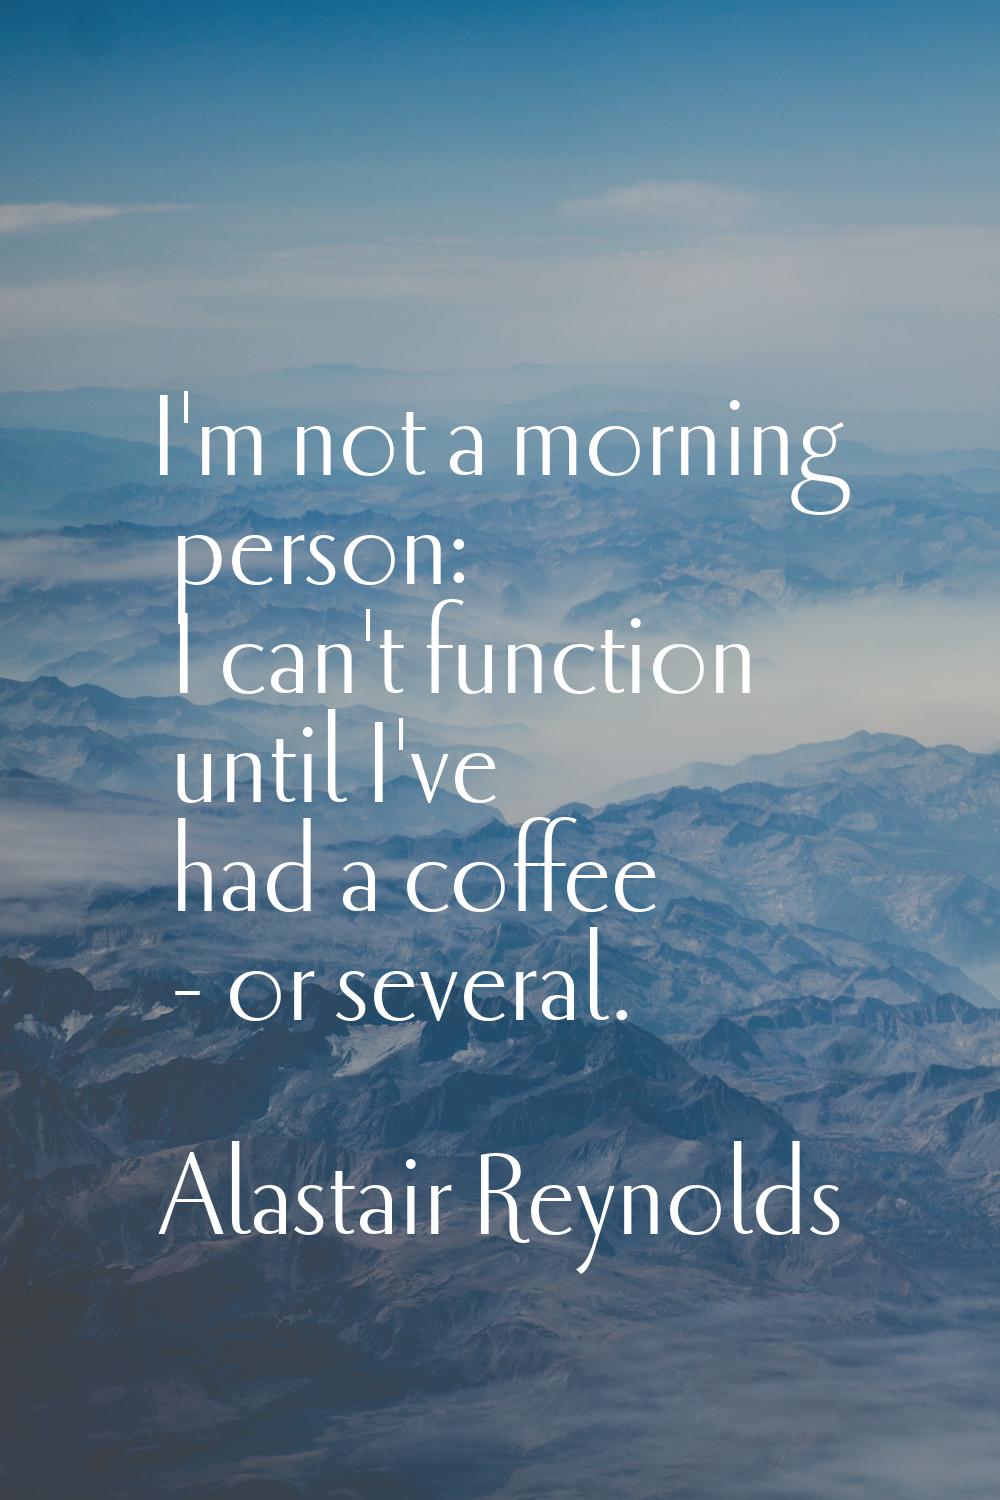 I'm not a morning person: I can't function until I've had a coffee - or several.